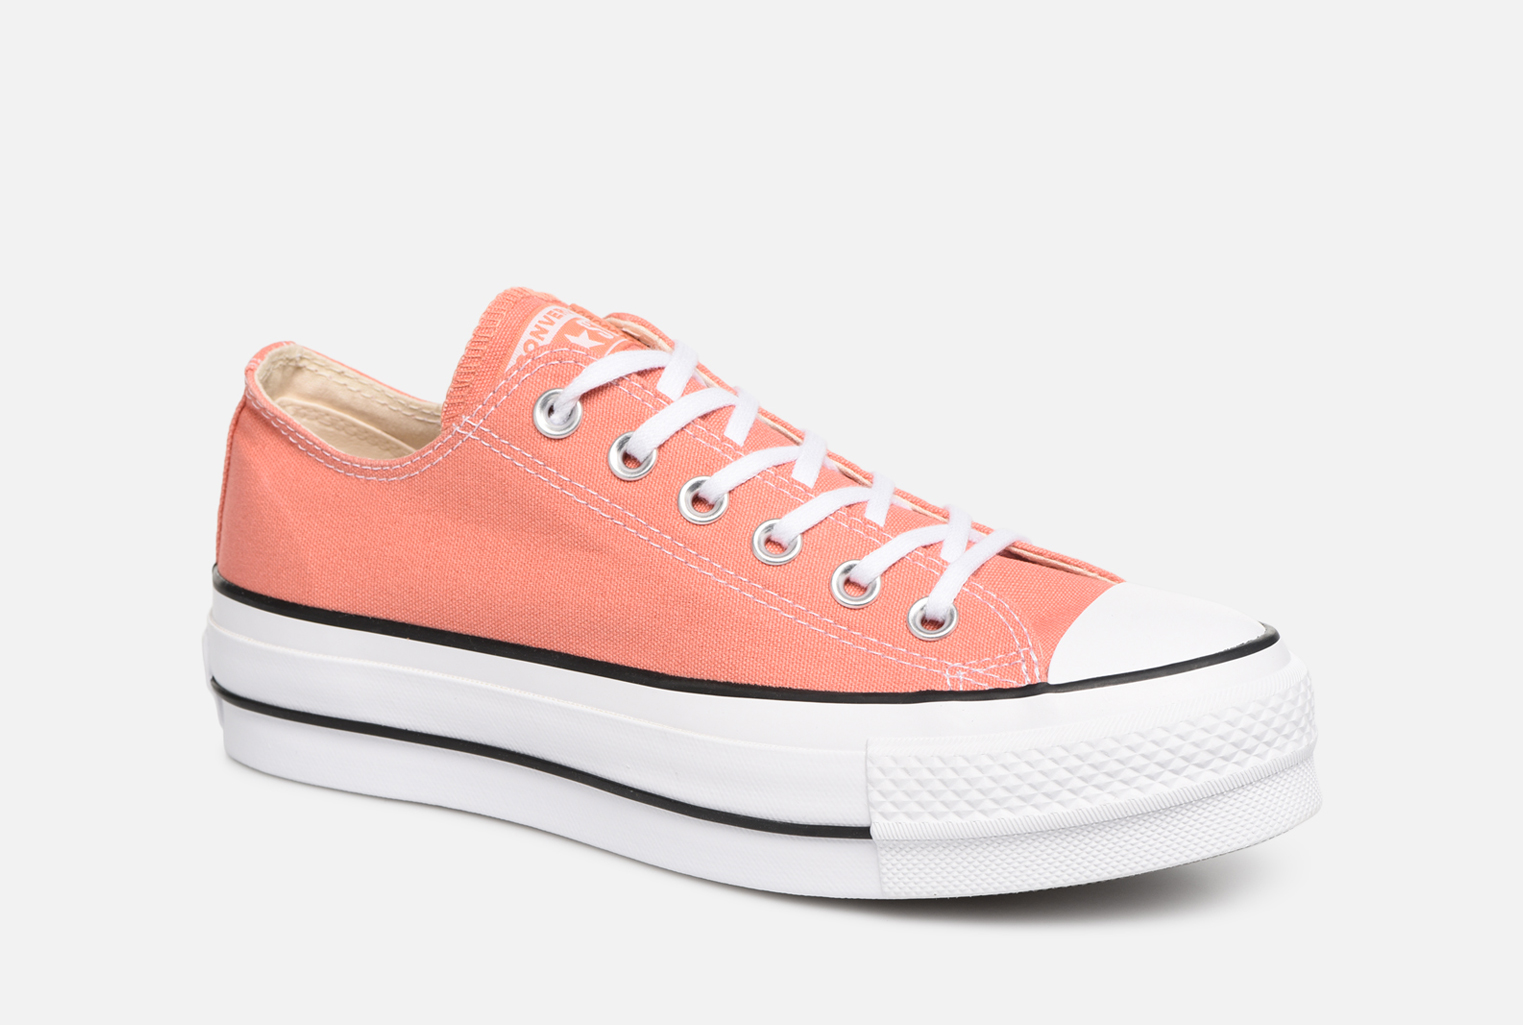 converse basse blanche femme taille 37